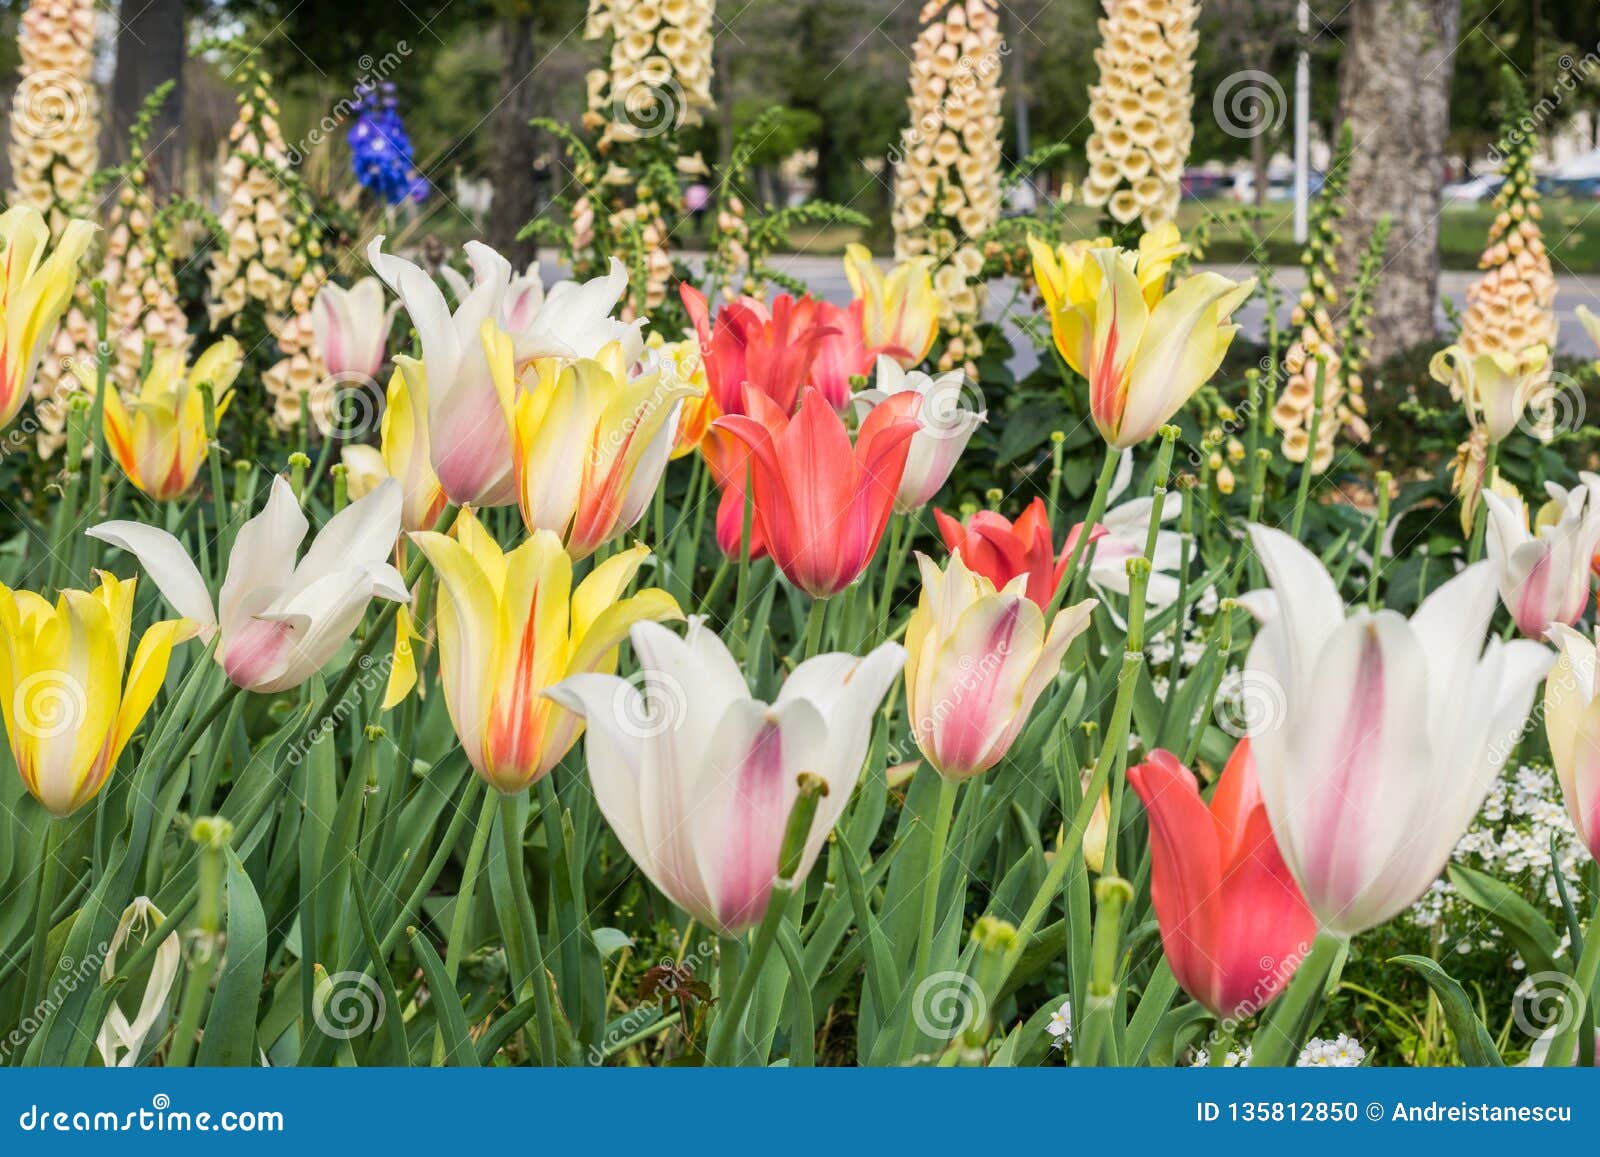 Many Different Varieties of Brightly Colored Tulips, California Stock